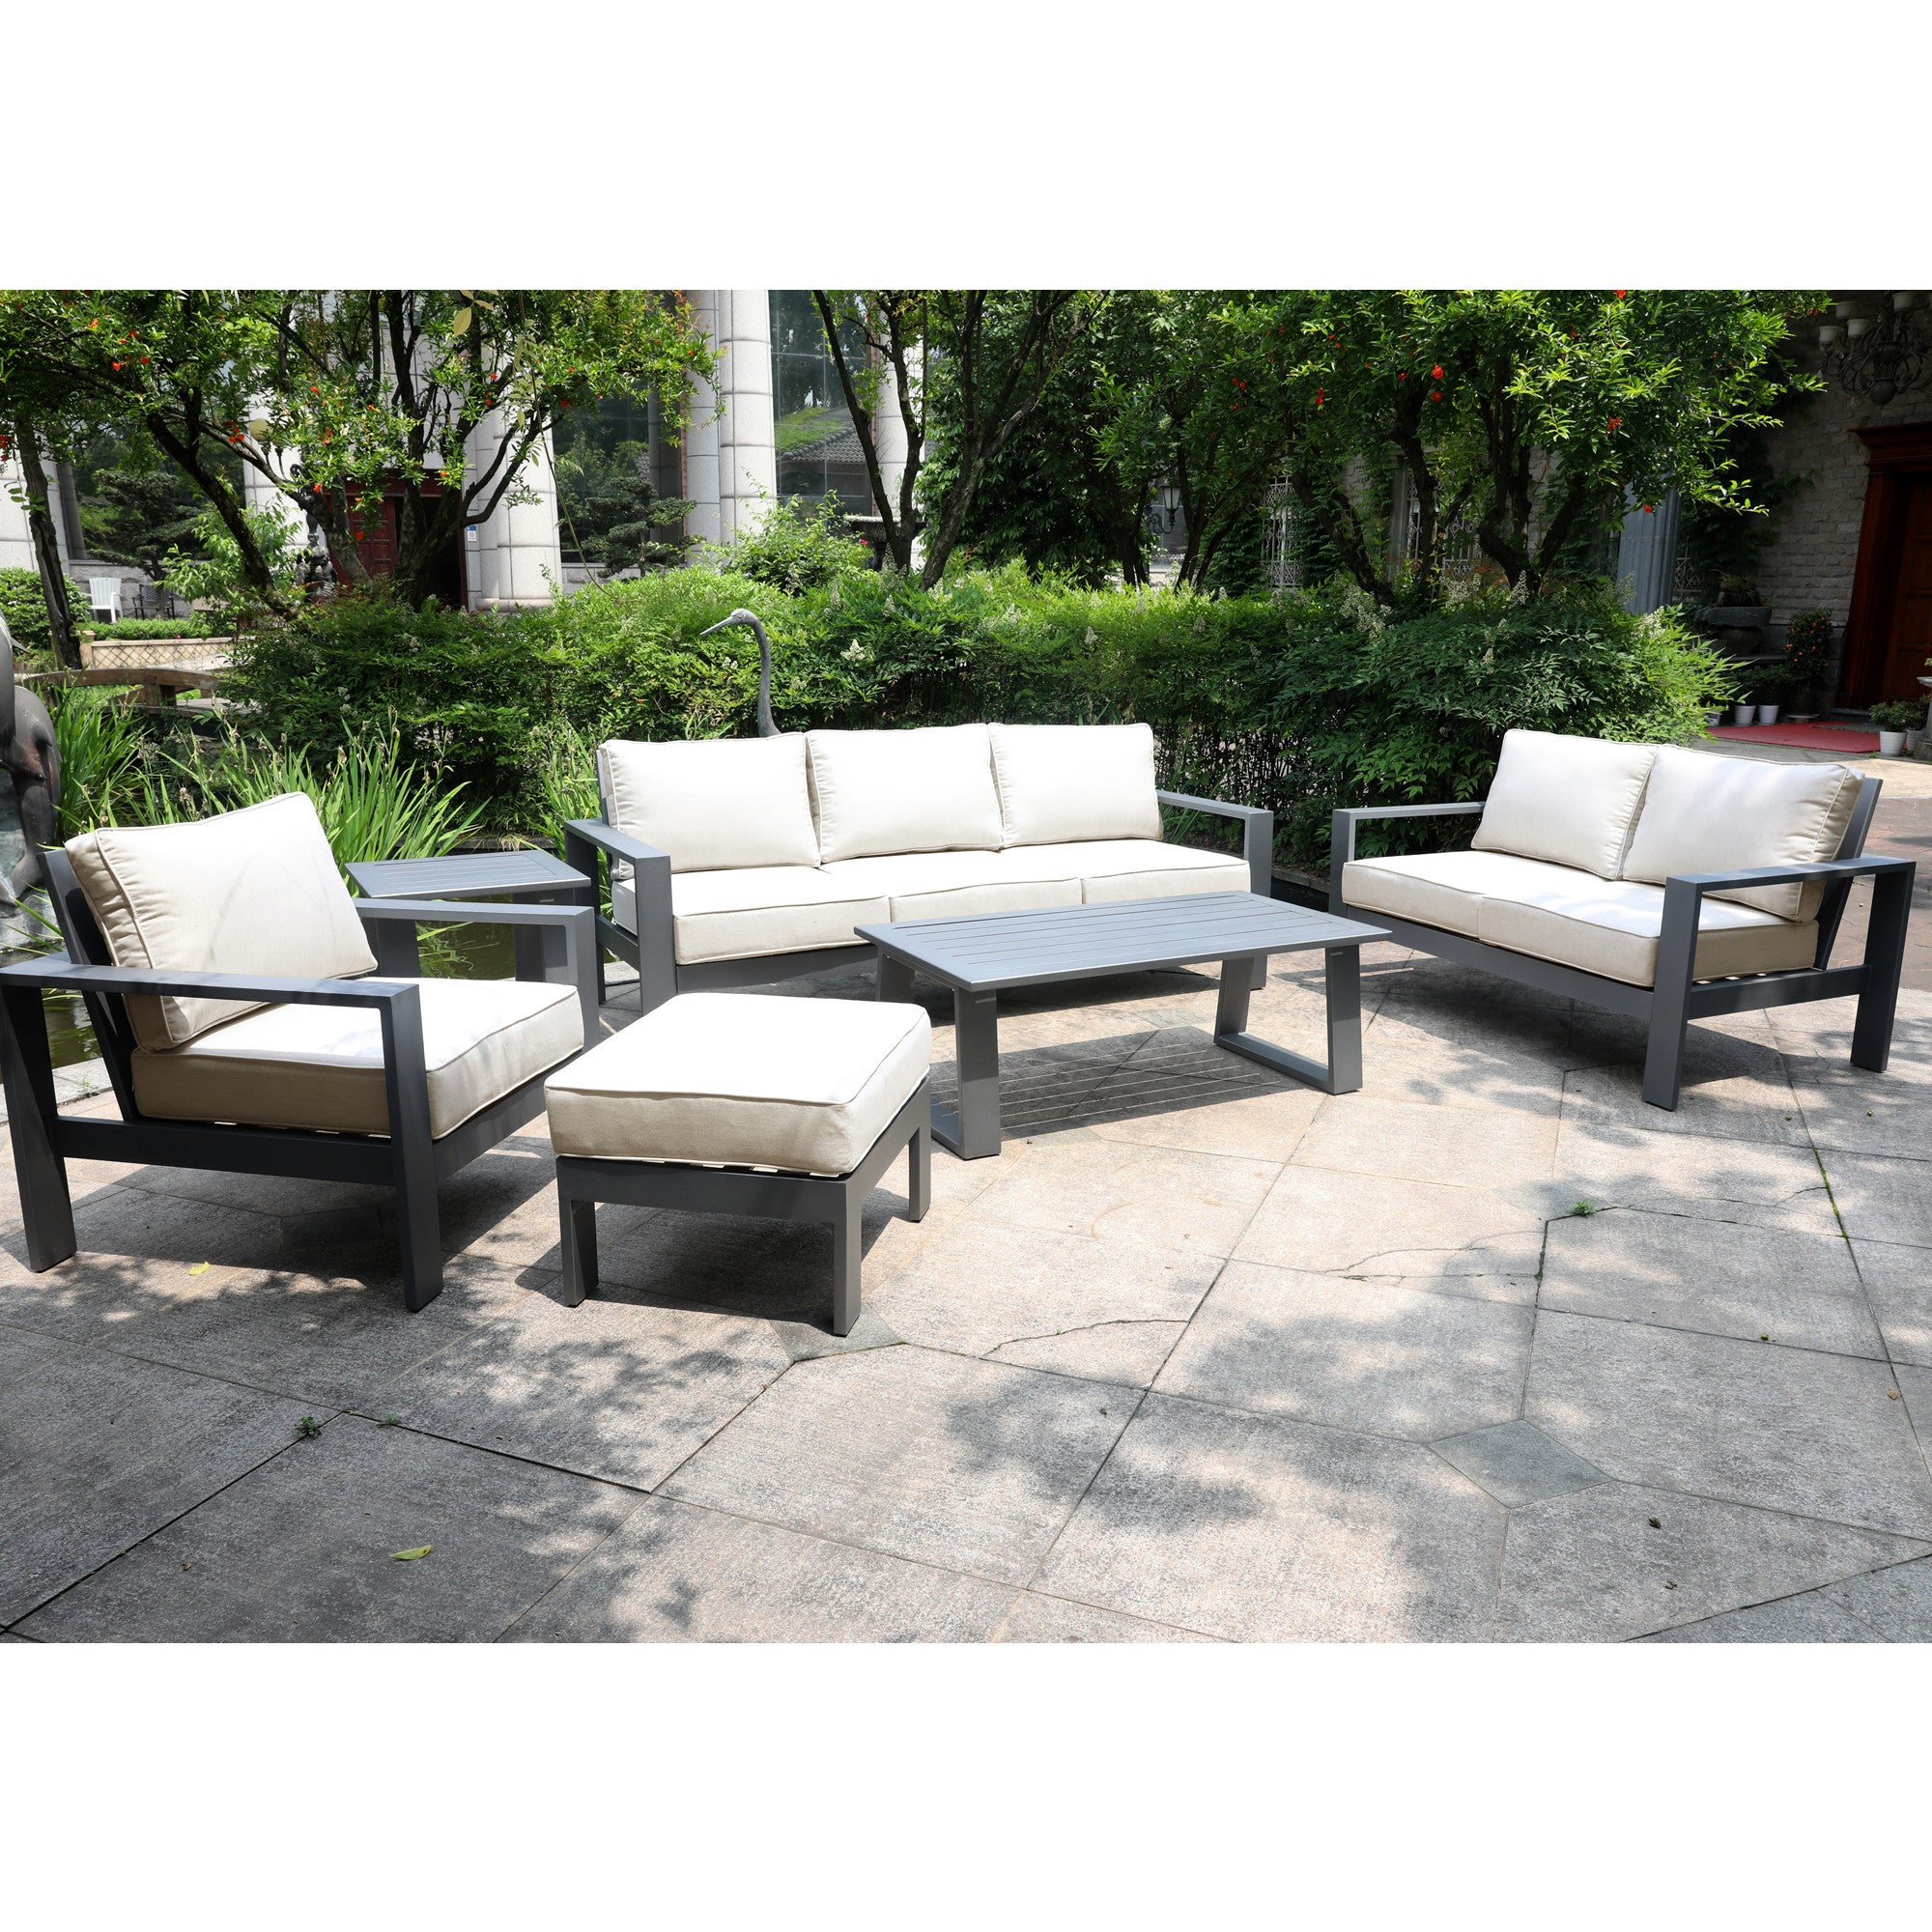 6 Piece Sofa Seating Group with Cushions, Powdered pewter-polyester-aluminum